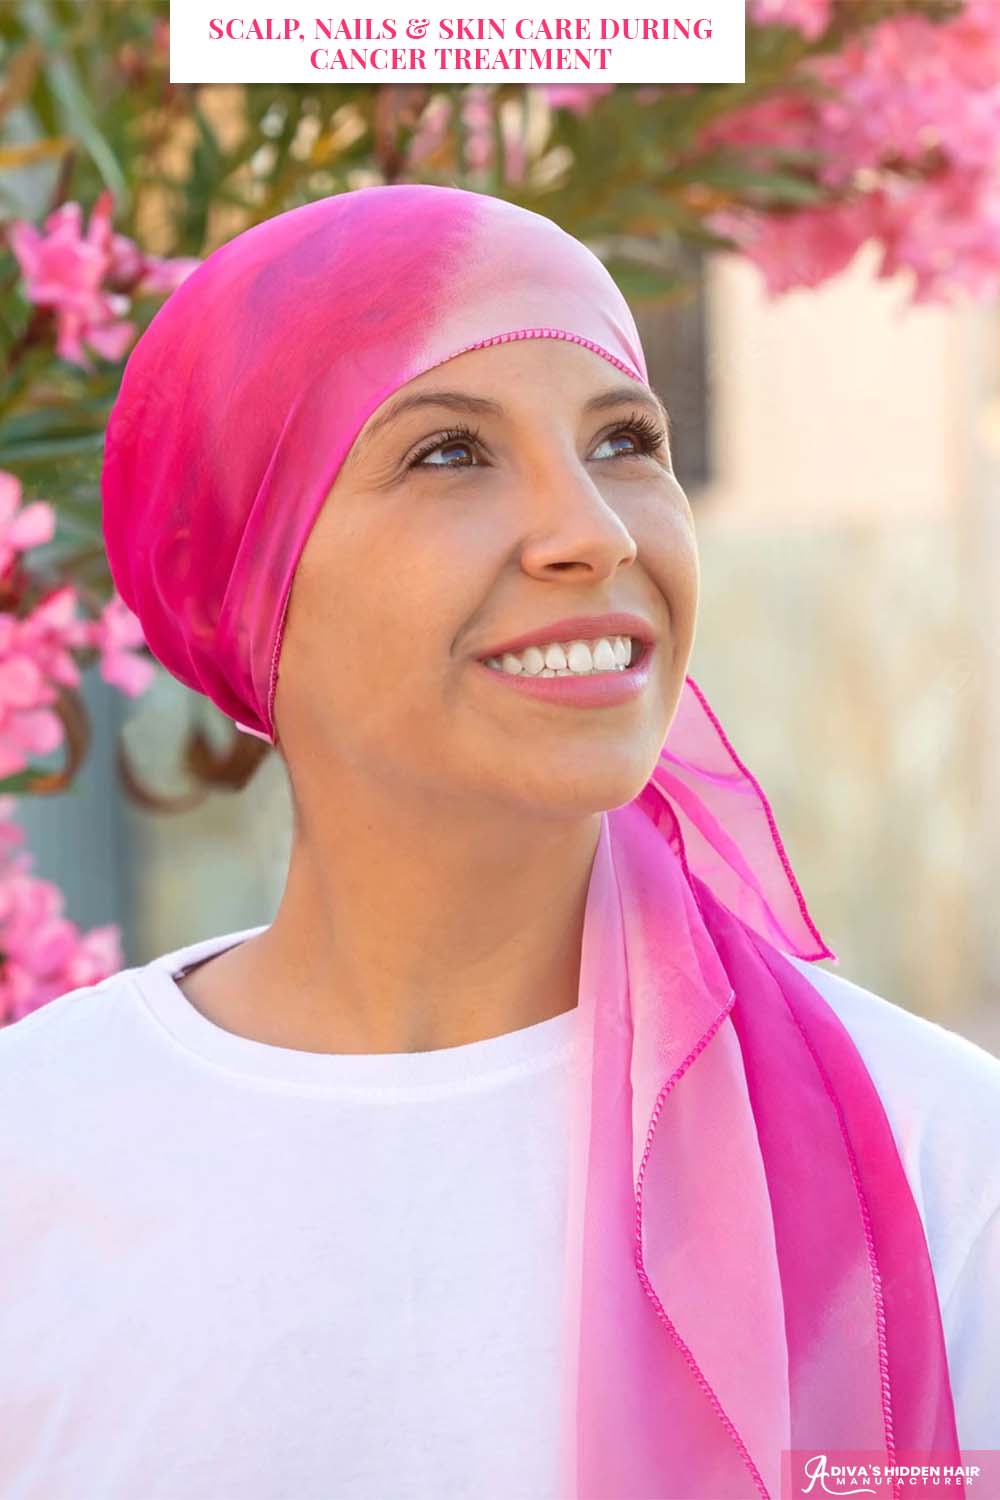 Scalp, Nails & Skin Care During Cancer Treatment